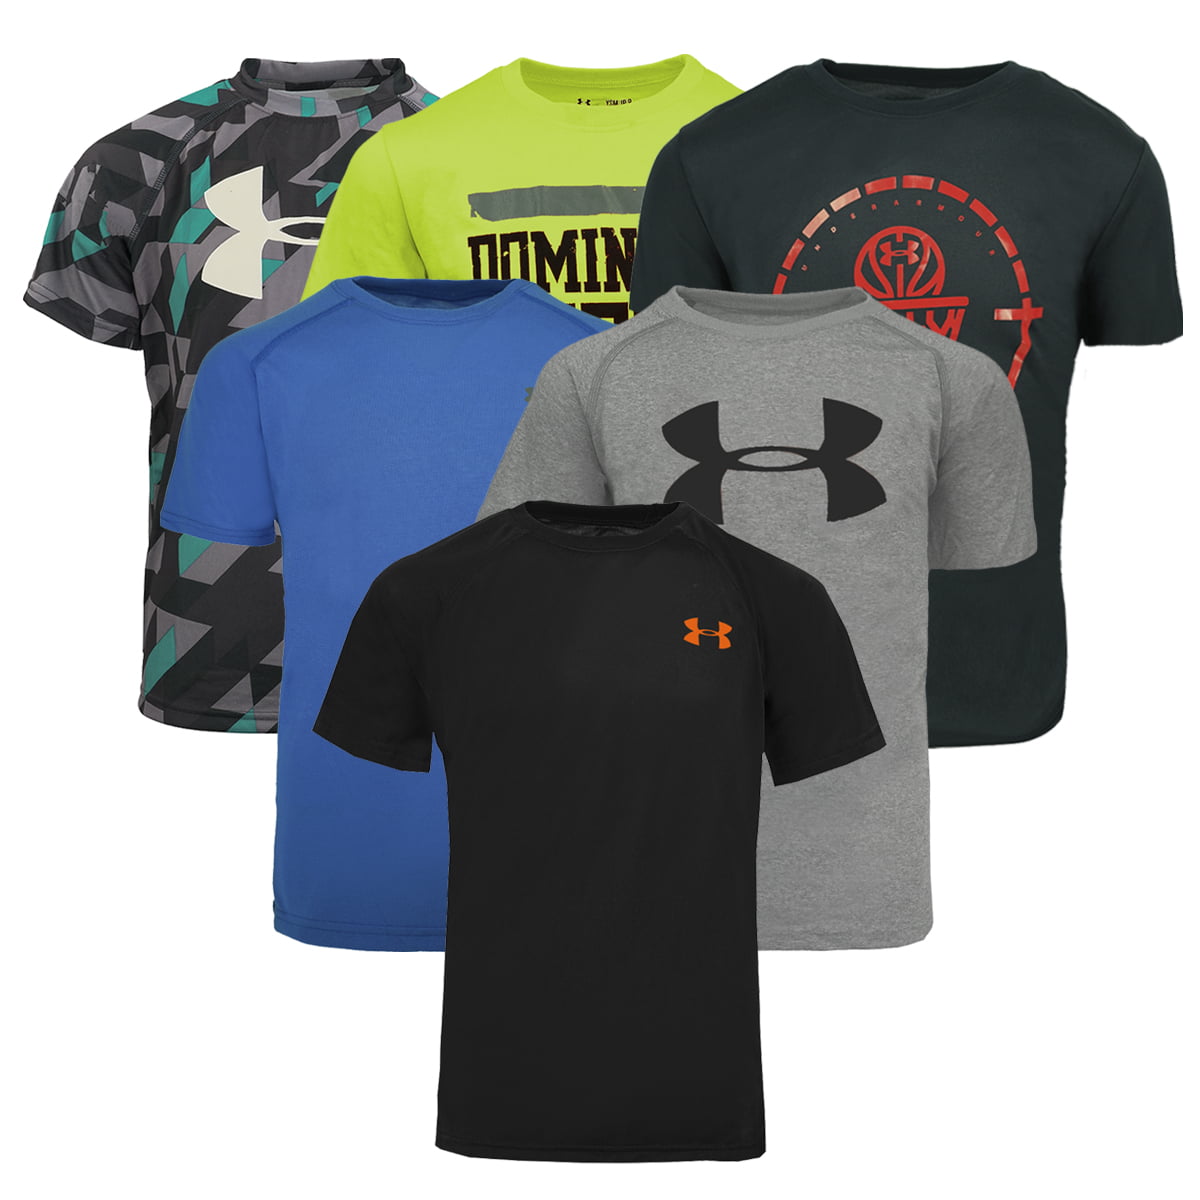 under armor clothing for sale